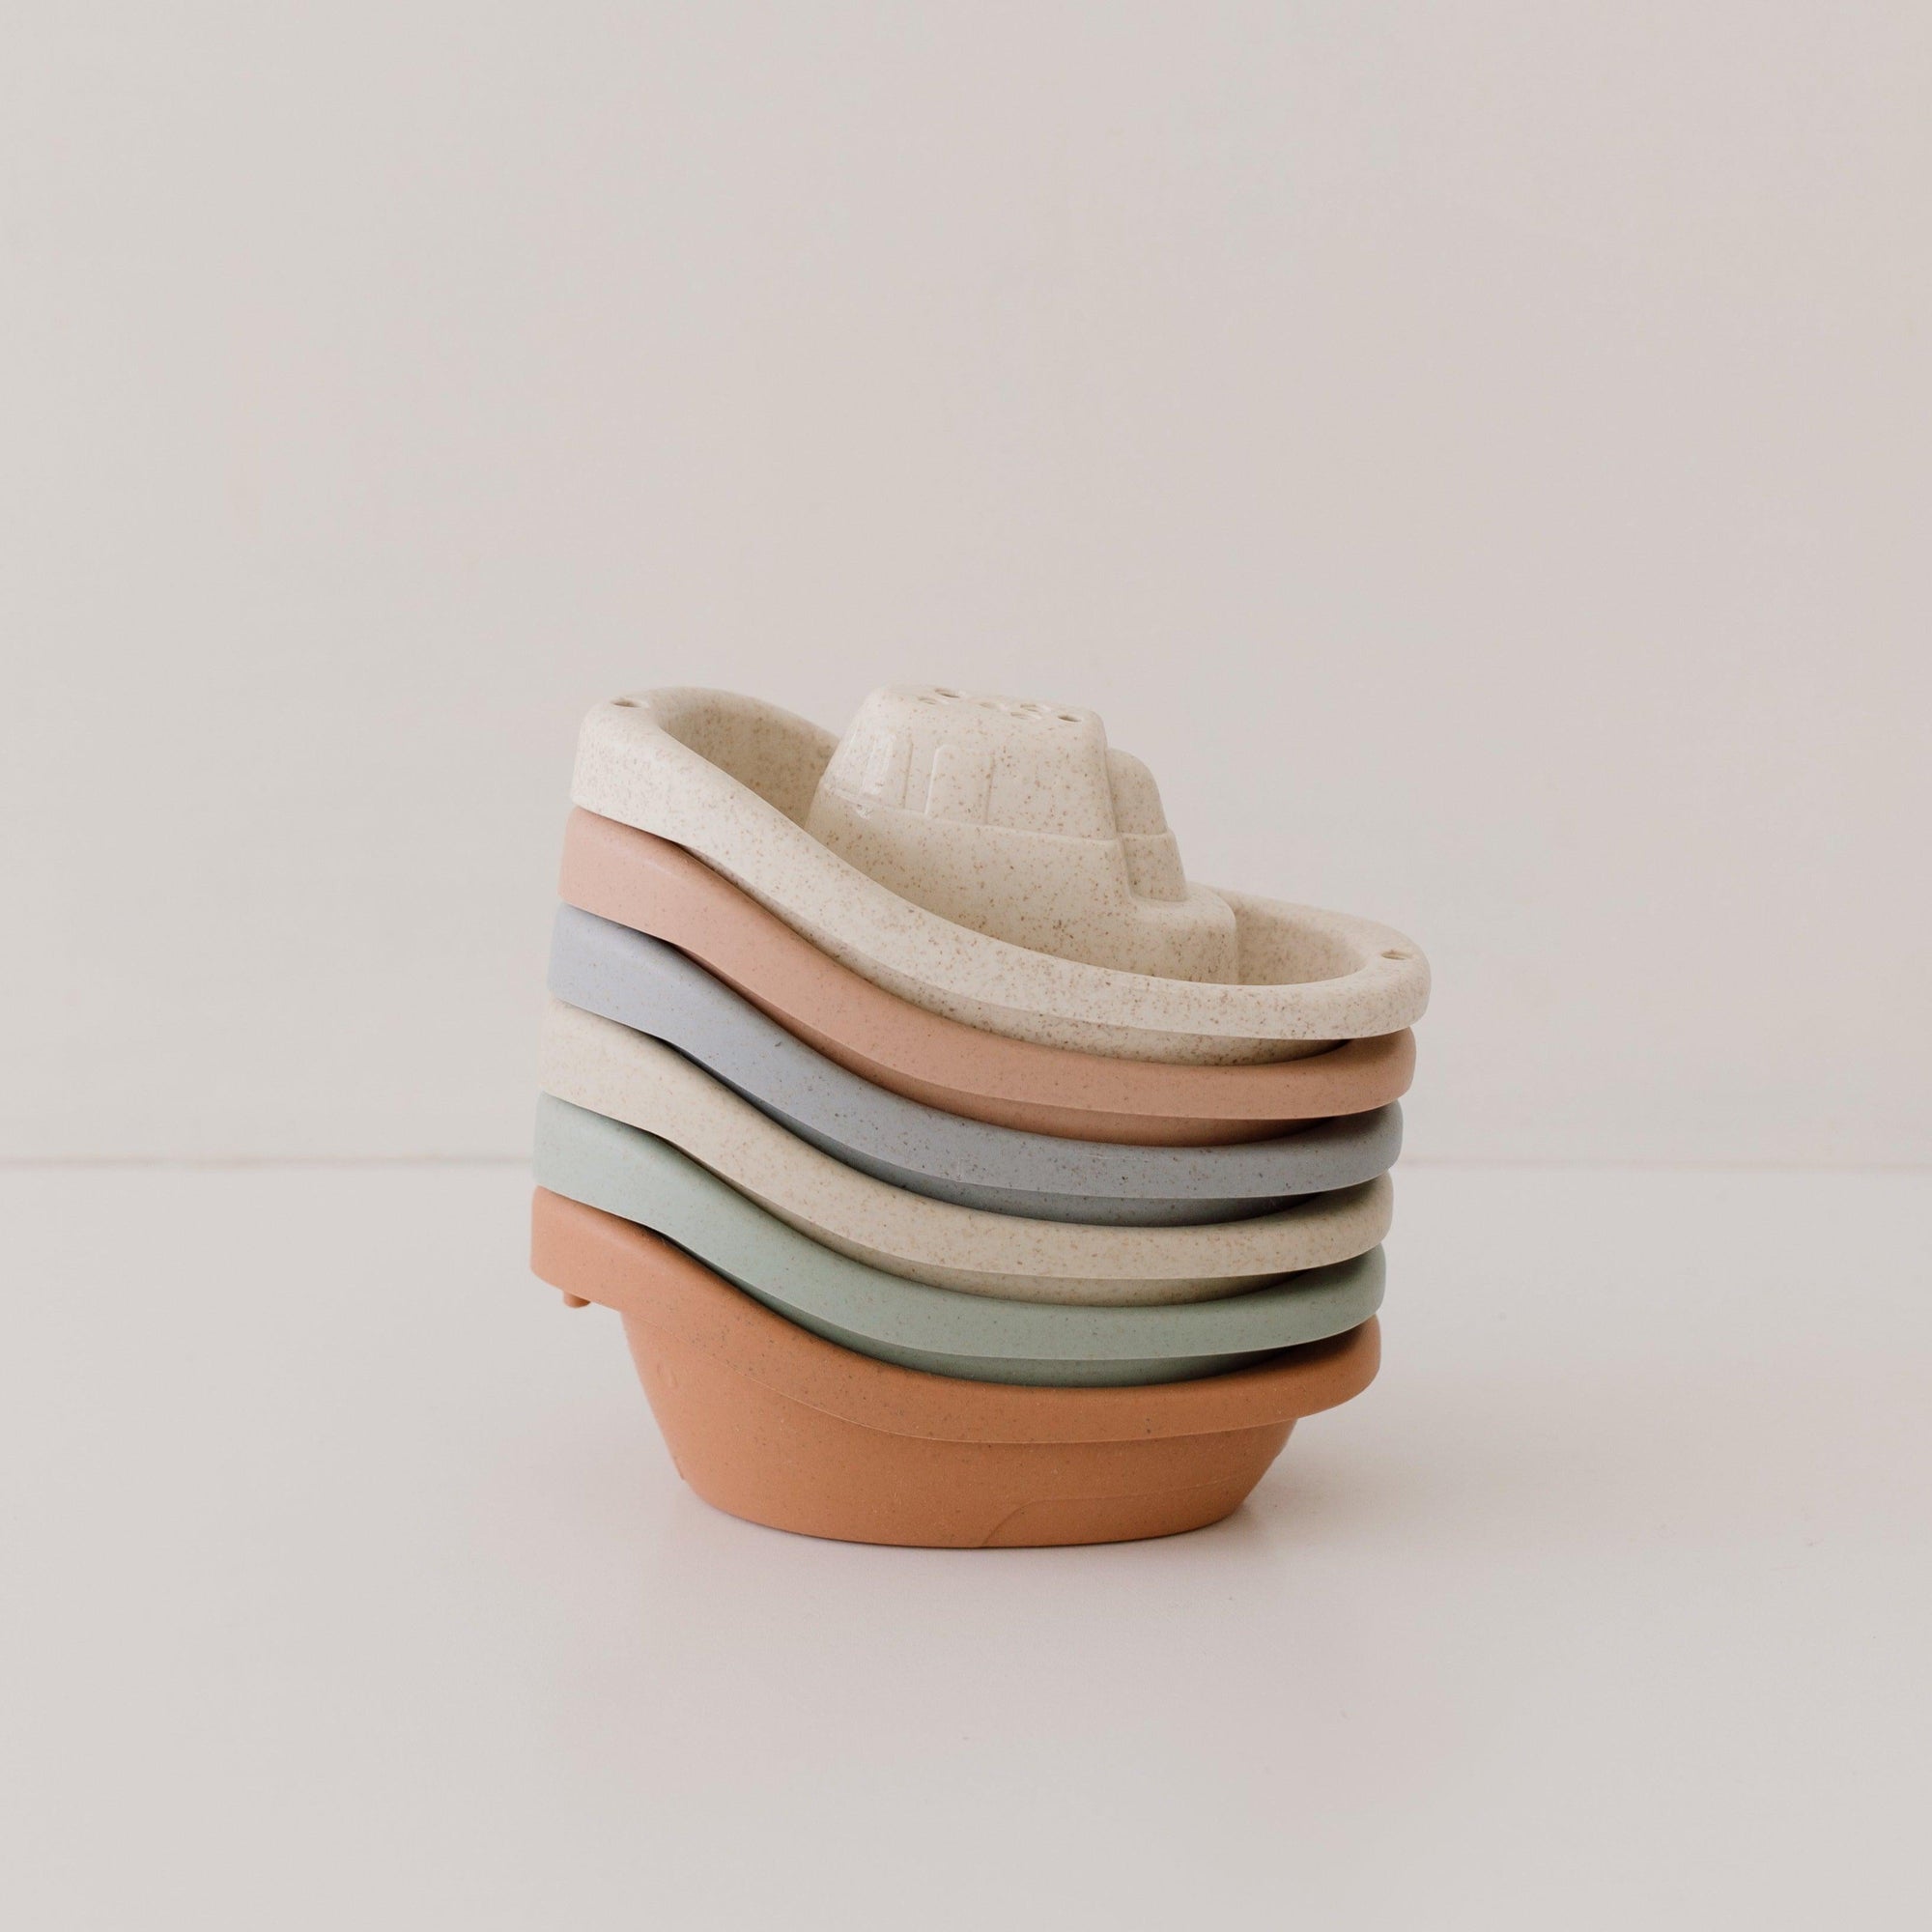 Bath time just got a whole lot cuter with these sweet little boat sets. Made from our popular biodegradable wheat straw, this sturdy design is practical, fun and environmentally friendly. 